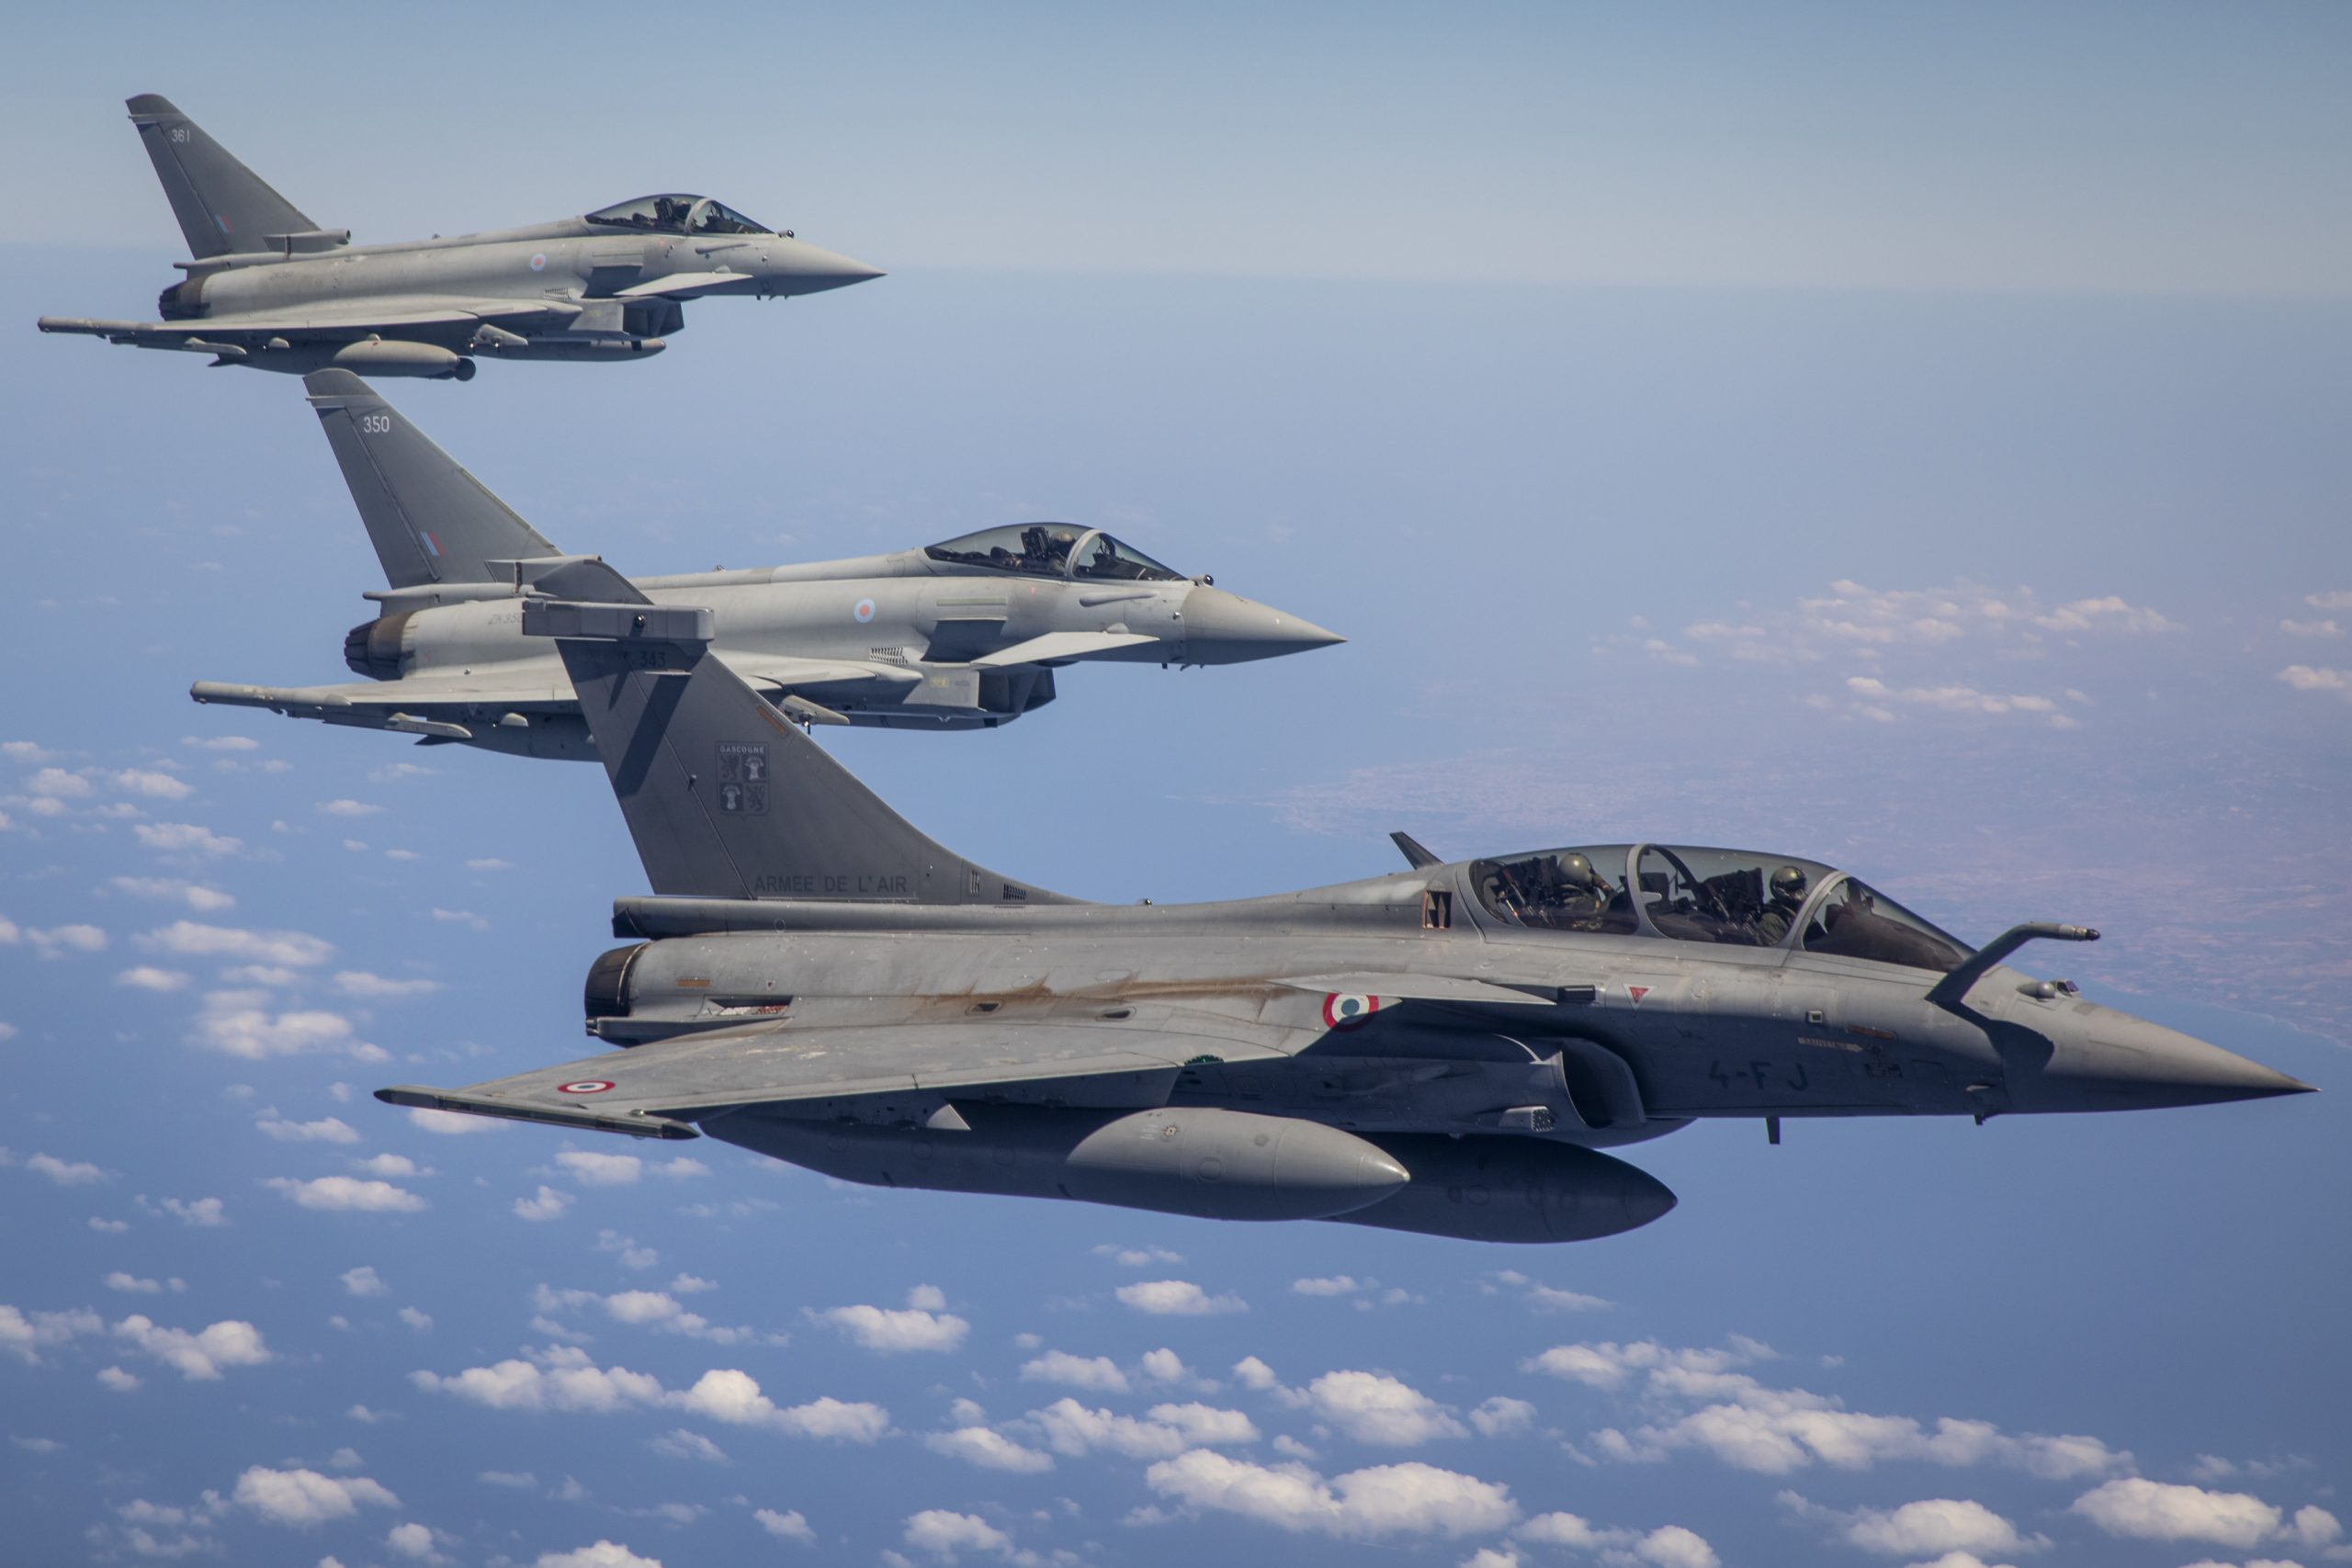 Rafales and typhoons engage in air combat missions